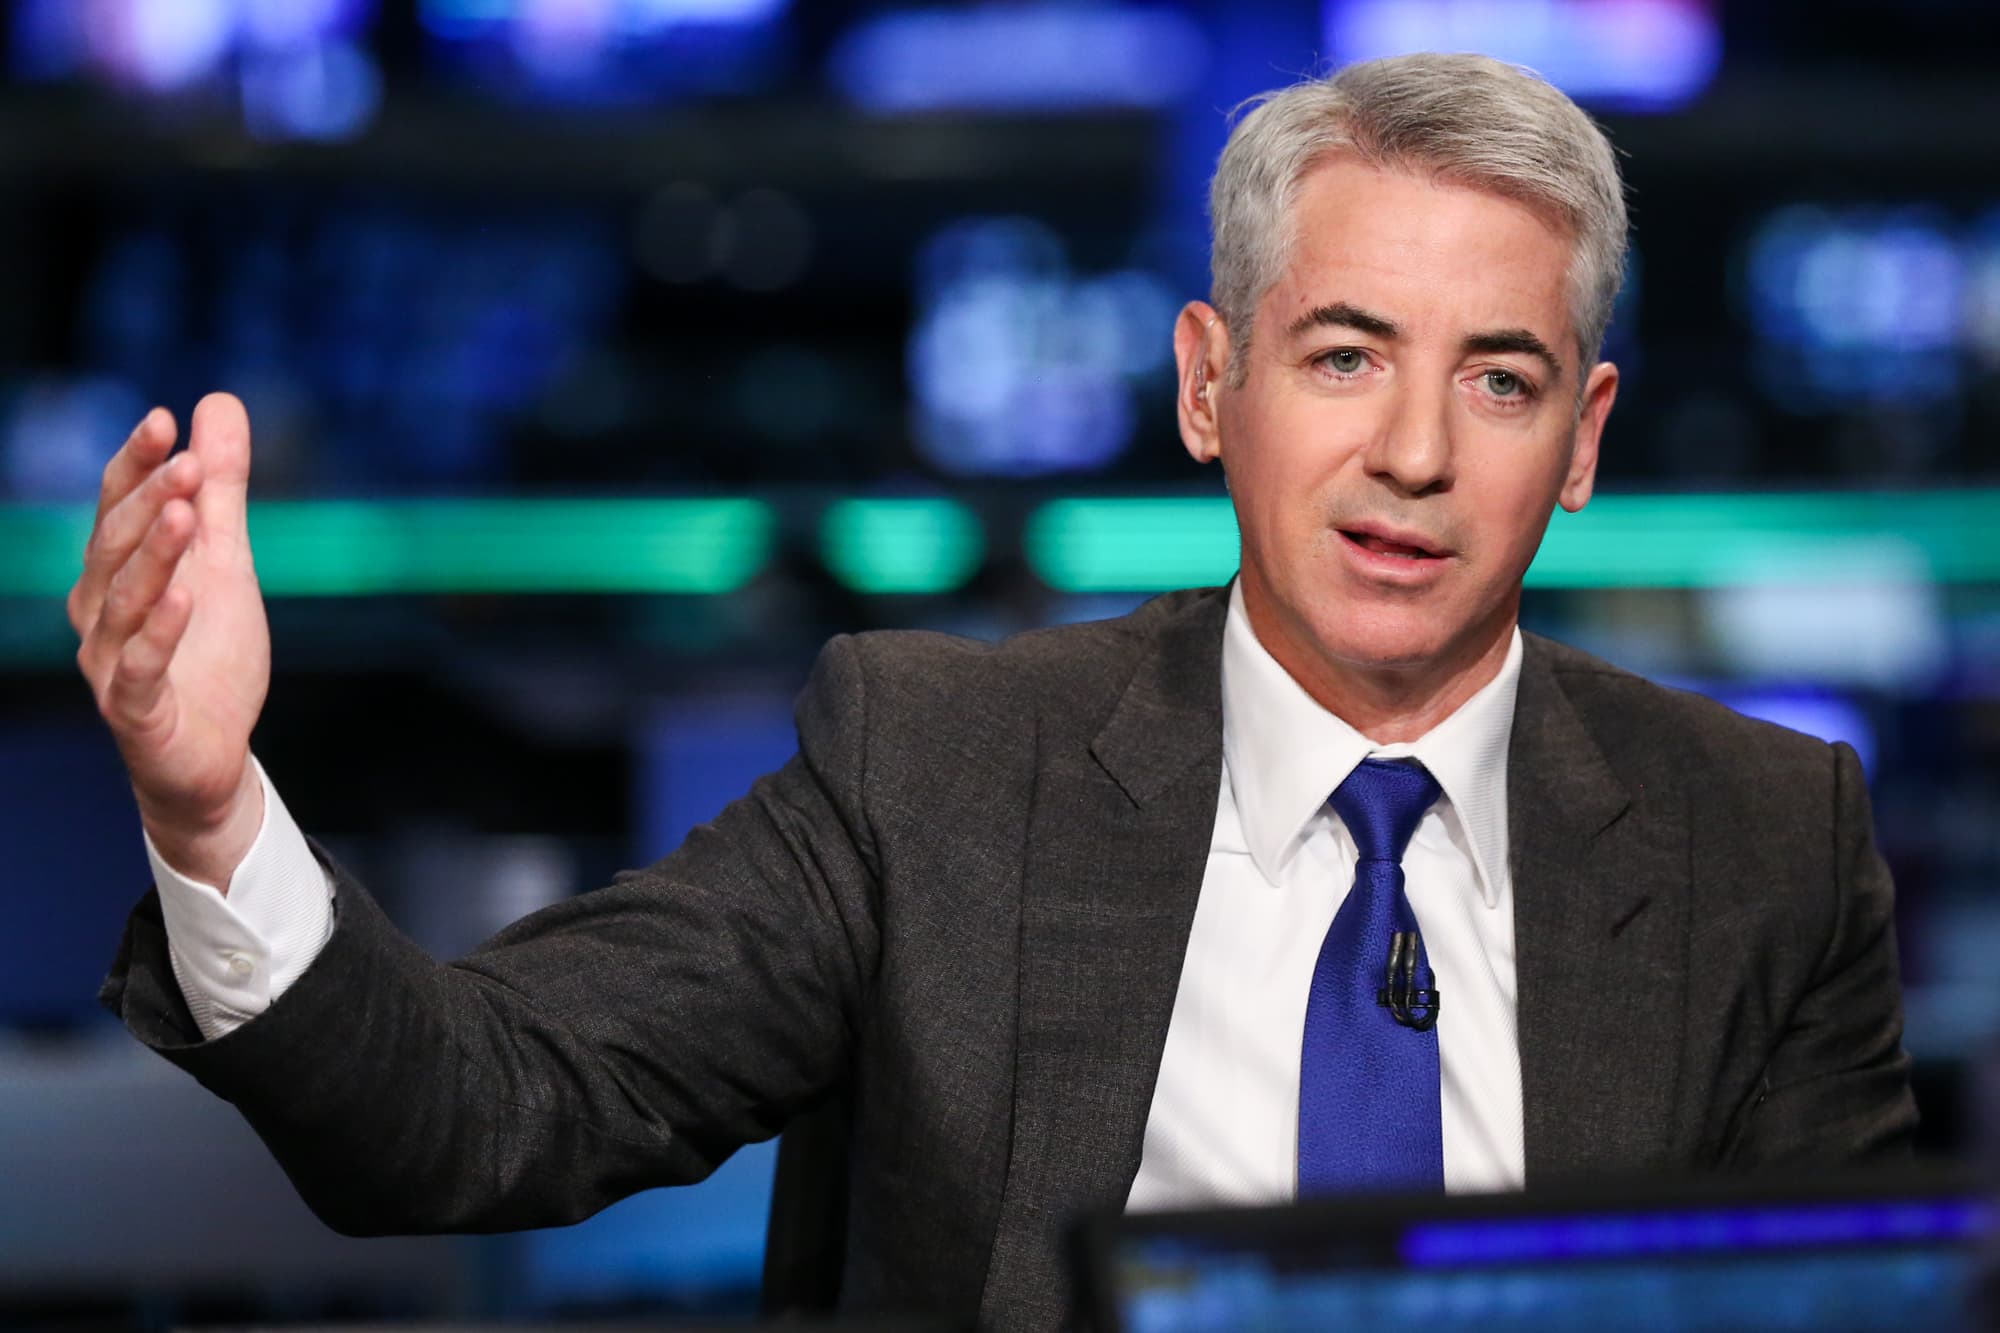 Right here’s what buyers can anticipate from Invoice Ackman’s Common Music SPAC deal